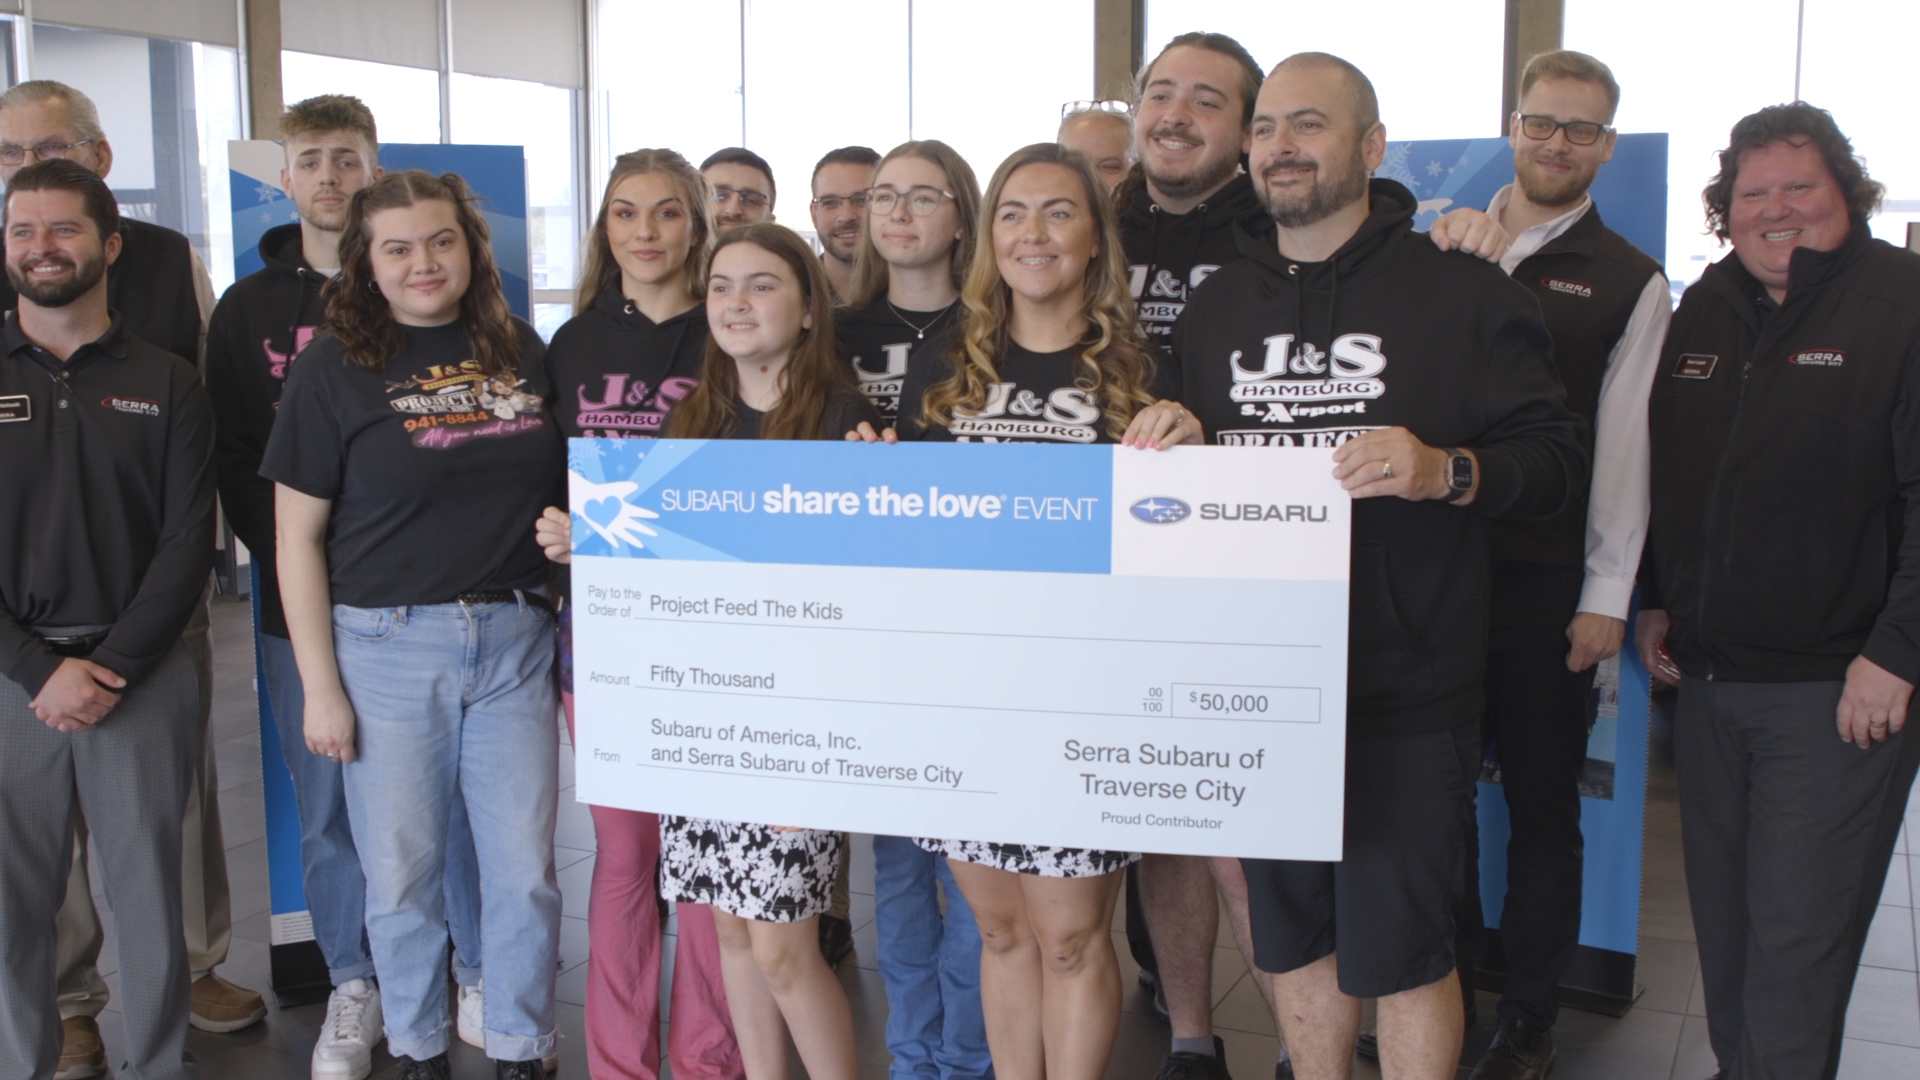 Project Feed the Kids receives major donation from Subaru Share the Love Event